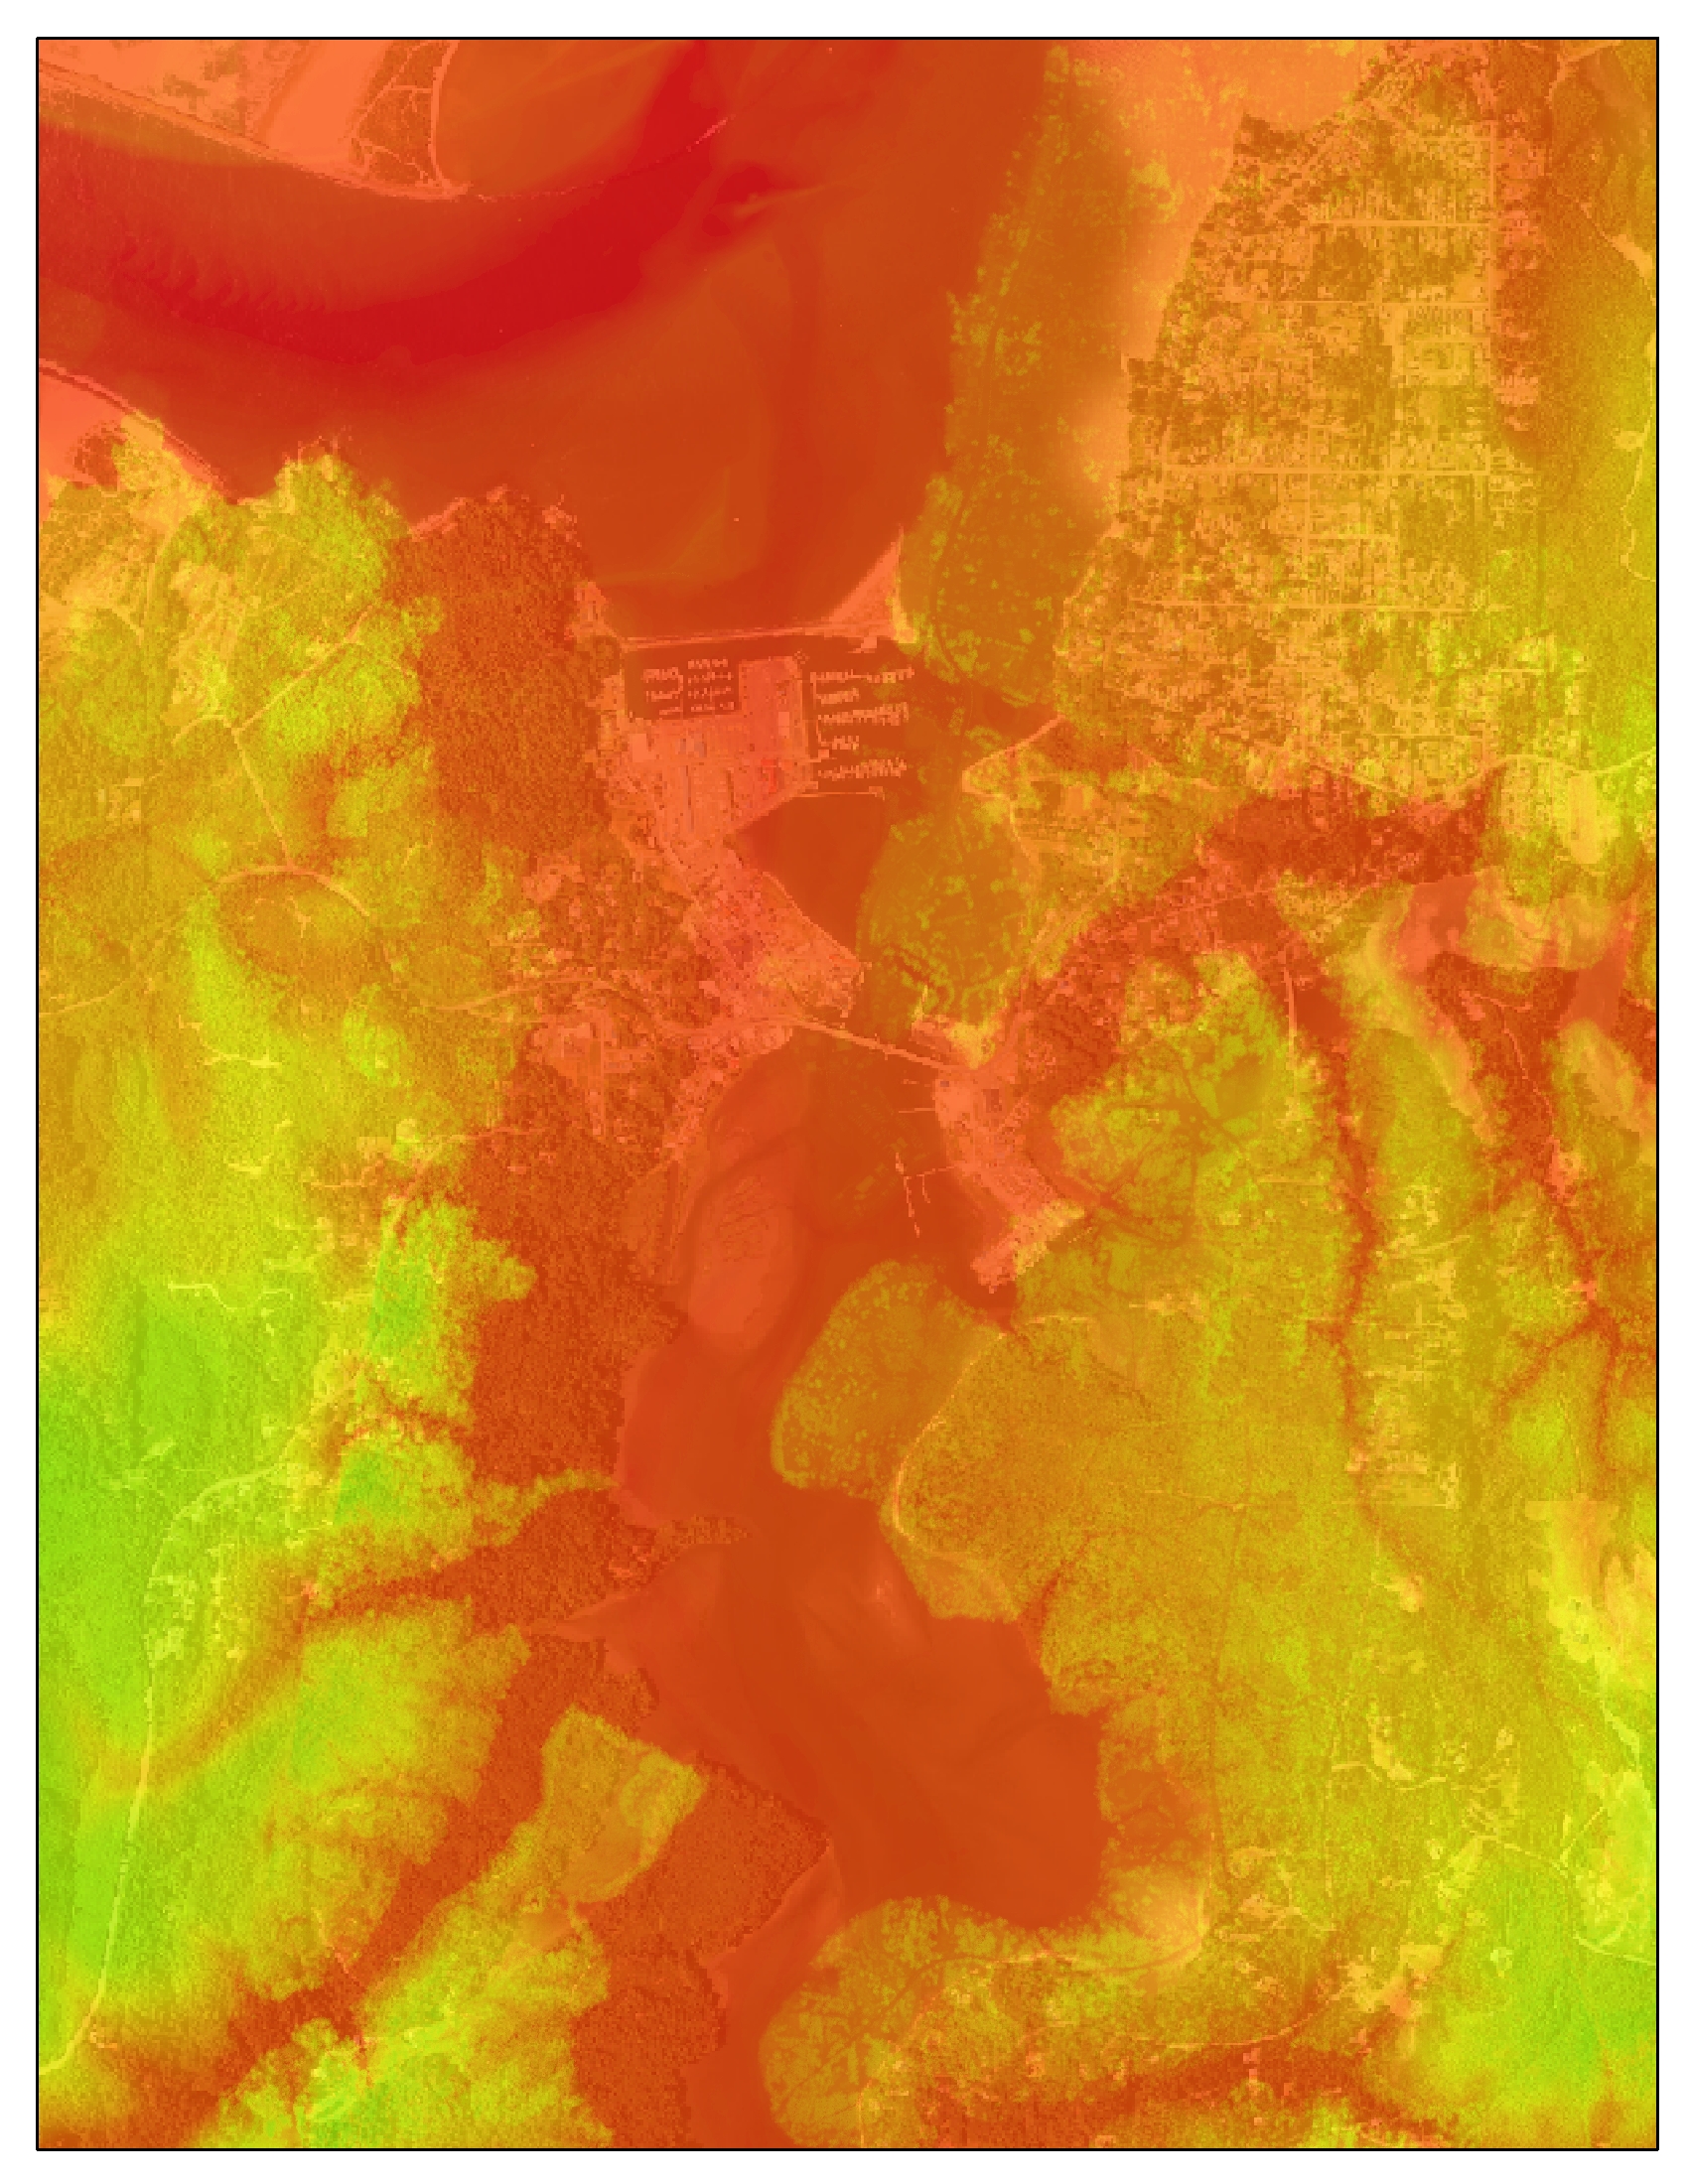 Showing offset of raster (red-green scale) in northwestern direction from basemap.